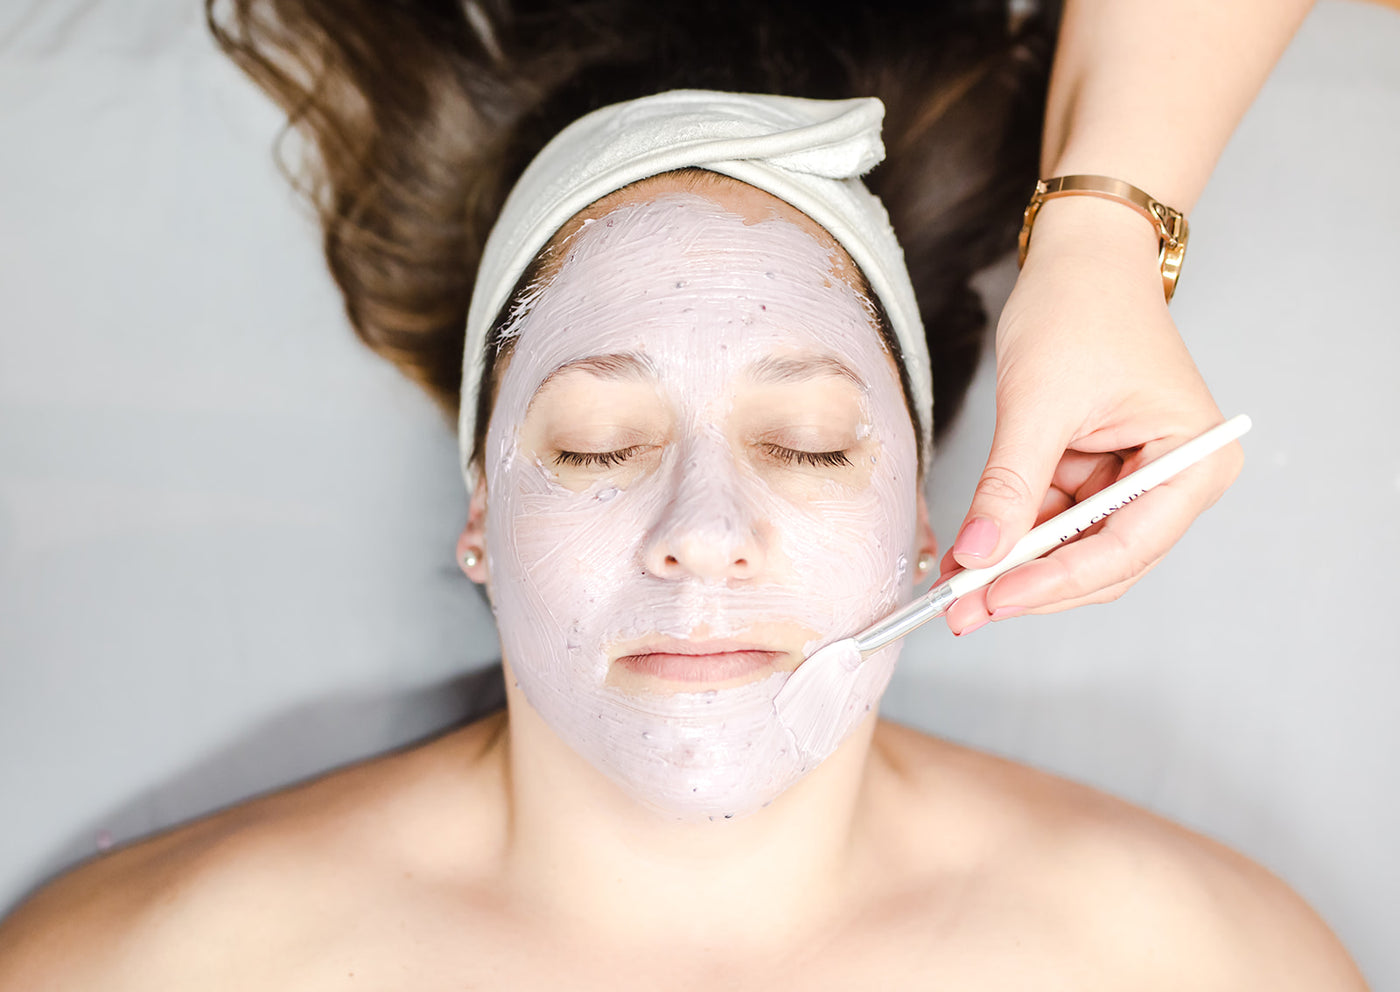 Woman in spa treatment getting an Eminence Organics face mask applied